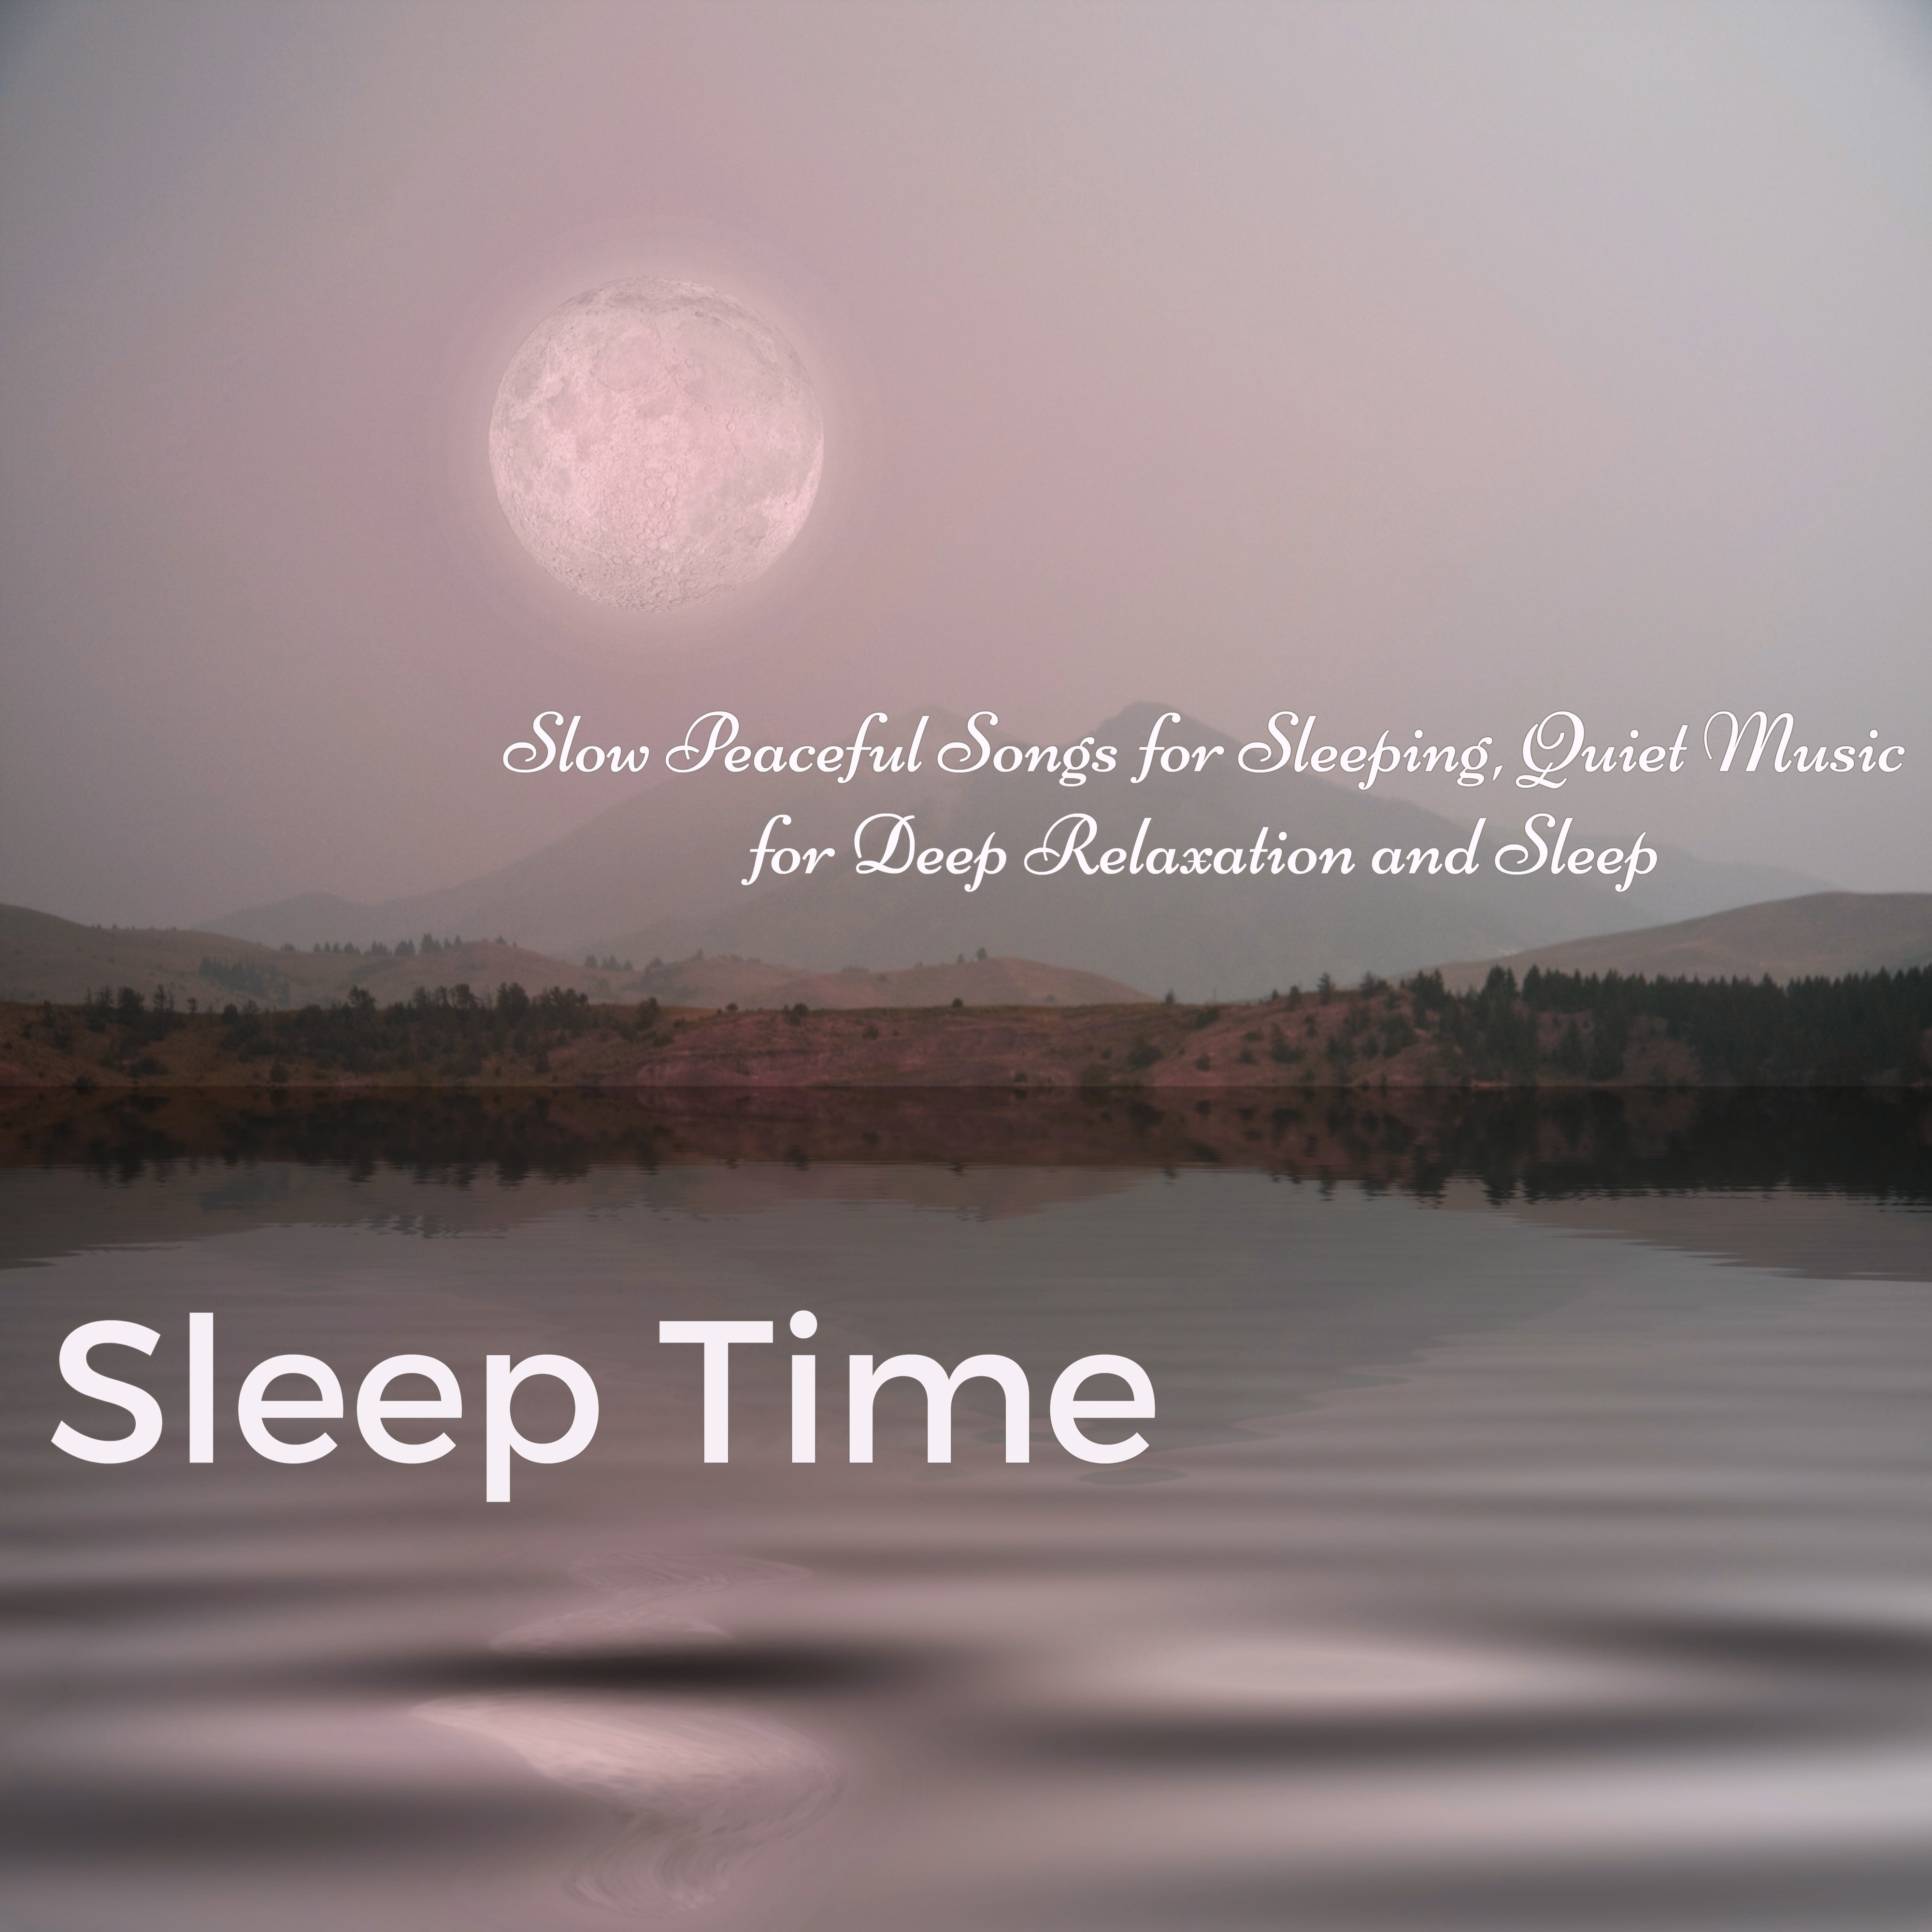 Sleep Time  Slow Peaceful Songs for Sleeping, Quiet Music for Deep Relaxation and Sleep